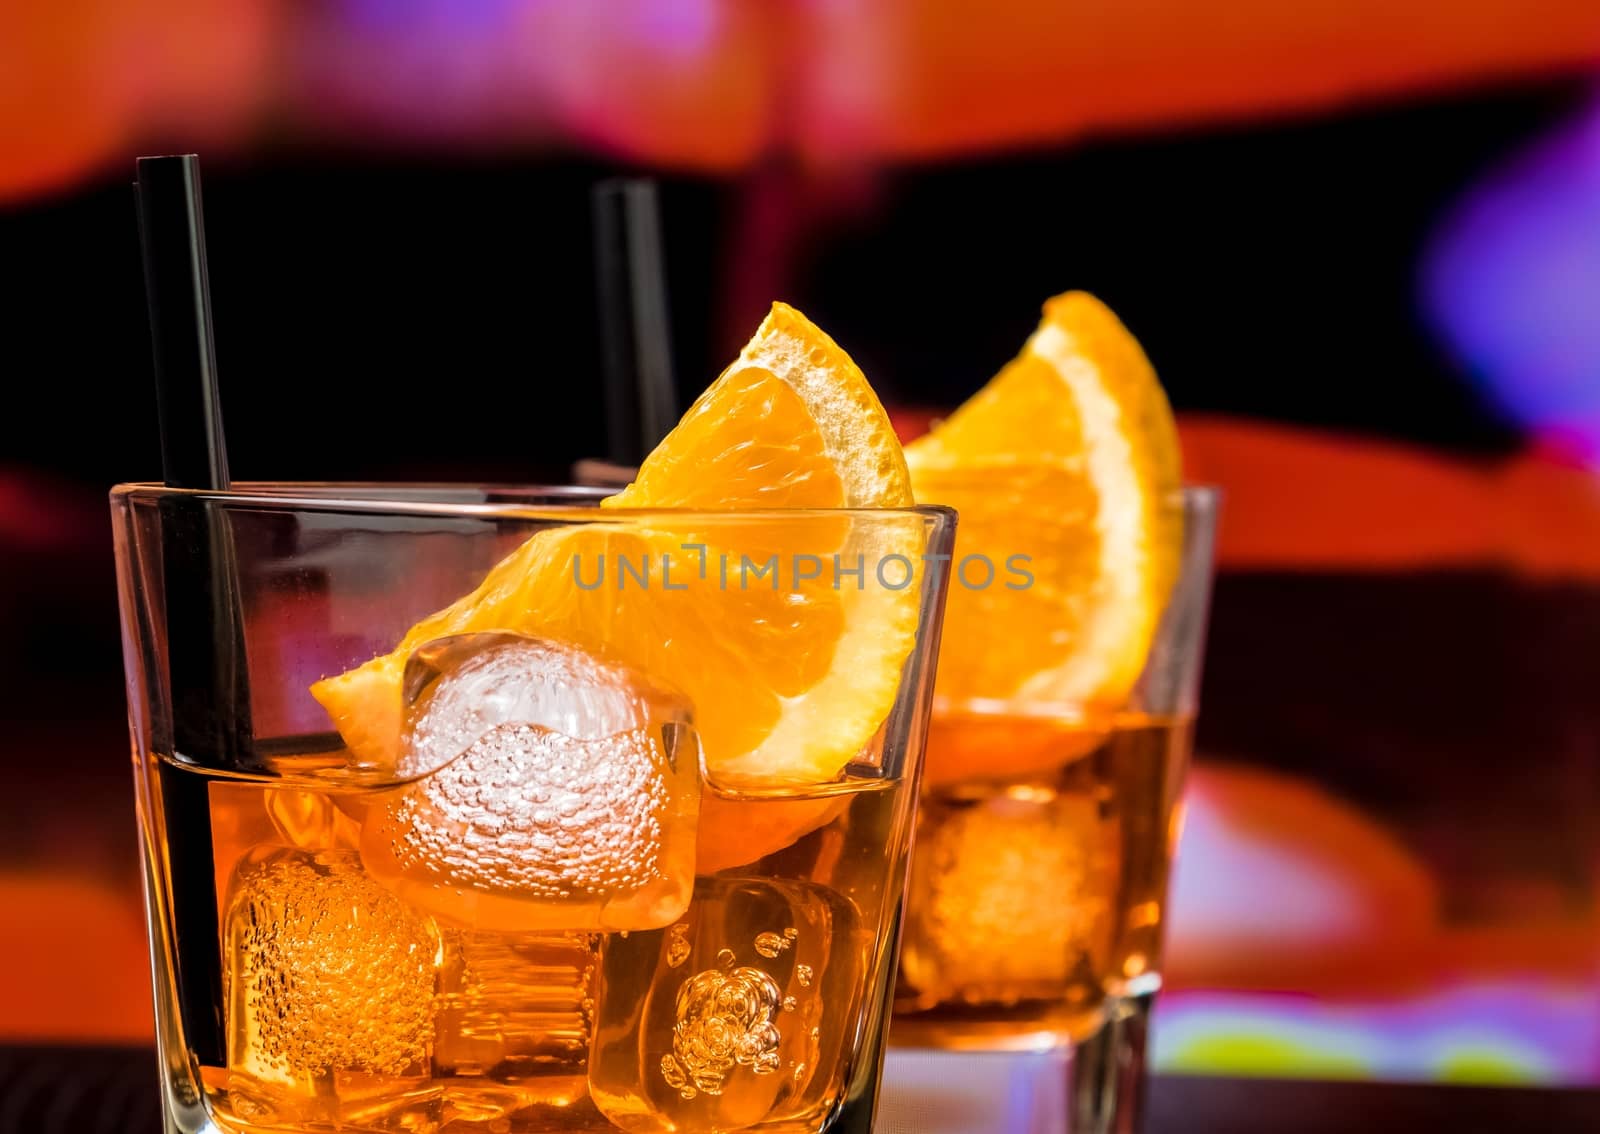 detail of glasses of spritz aperitif aperol cocktail with orange slices and ice cubes on bar table, vintage atmosphere background, lounge bar concept